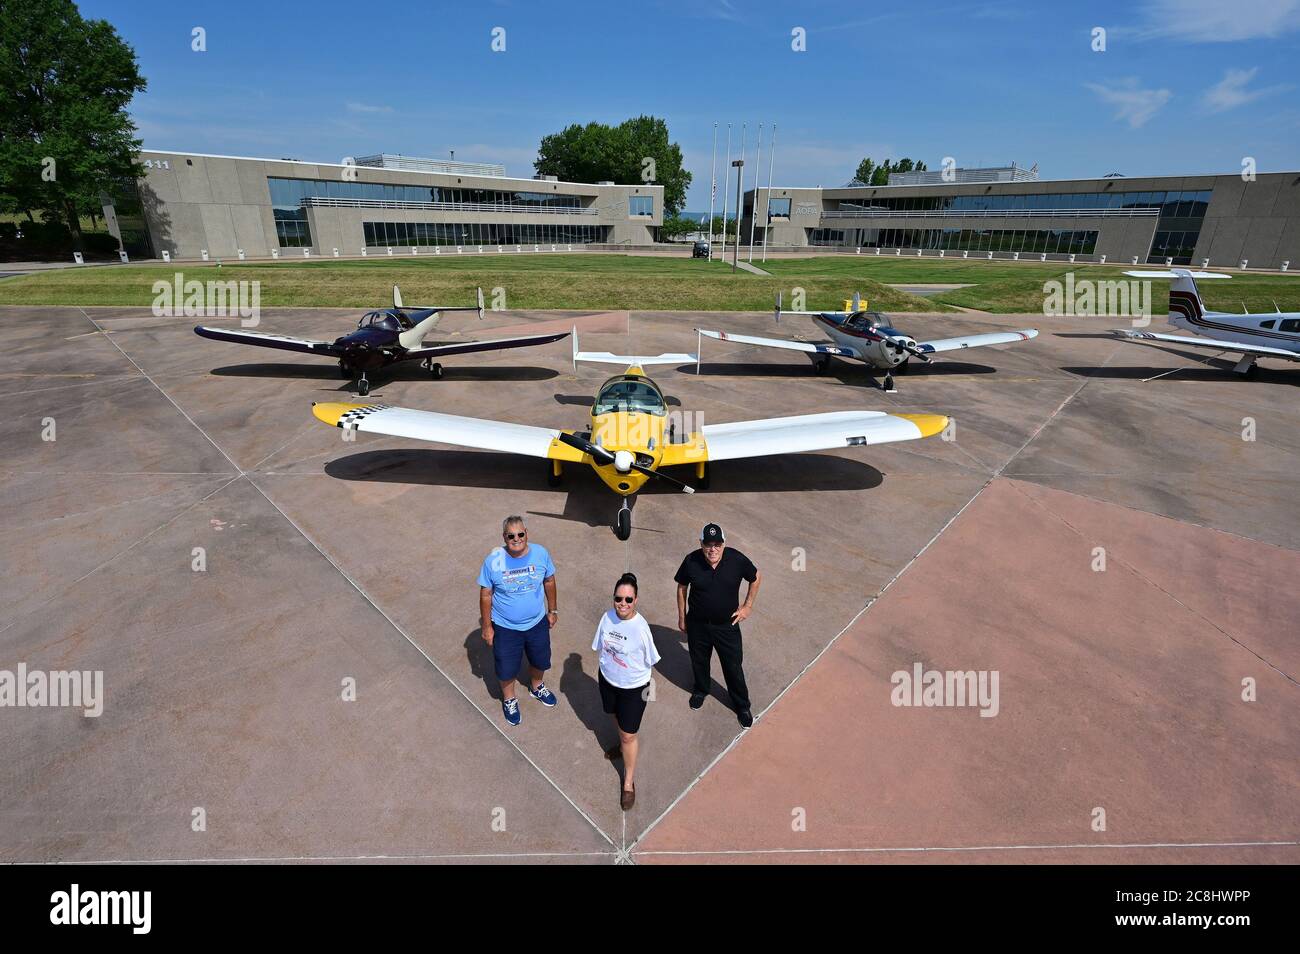 Frederick, United States. 24th July, 2020. American with Disabilities Act advocate and pilot Jessica Cox, who was born without arms and flies a two-seat Ercoupe airplane manufactured with linked aileron and rudder controls, poses for a portrait with fellow Ercoupe pilots R. Lee Townsend, right, and Joe Novotny during a visit to the Aircraft Owners and Pilots Association at Frederick Municipal Airport in Frederick, Maryland, Wednesday, July 22, 2020. Credit: UPI/Alamy Live News Stock Photo